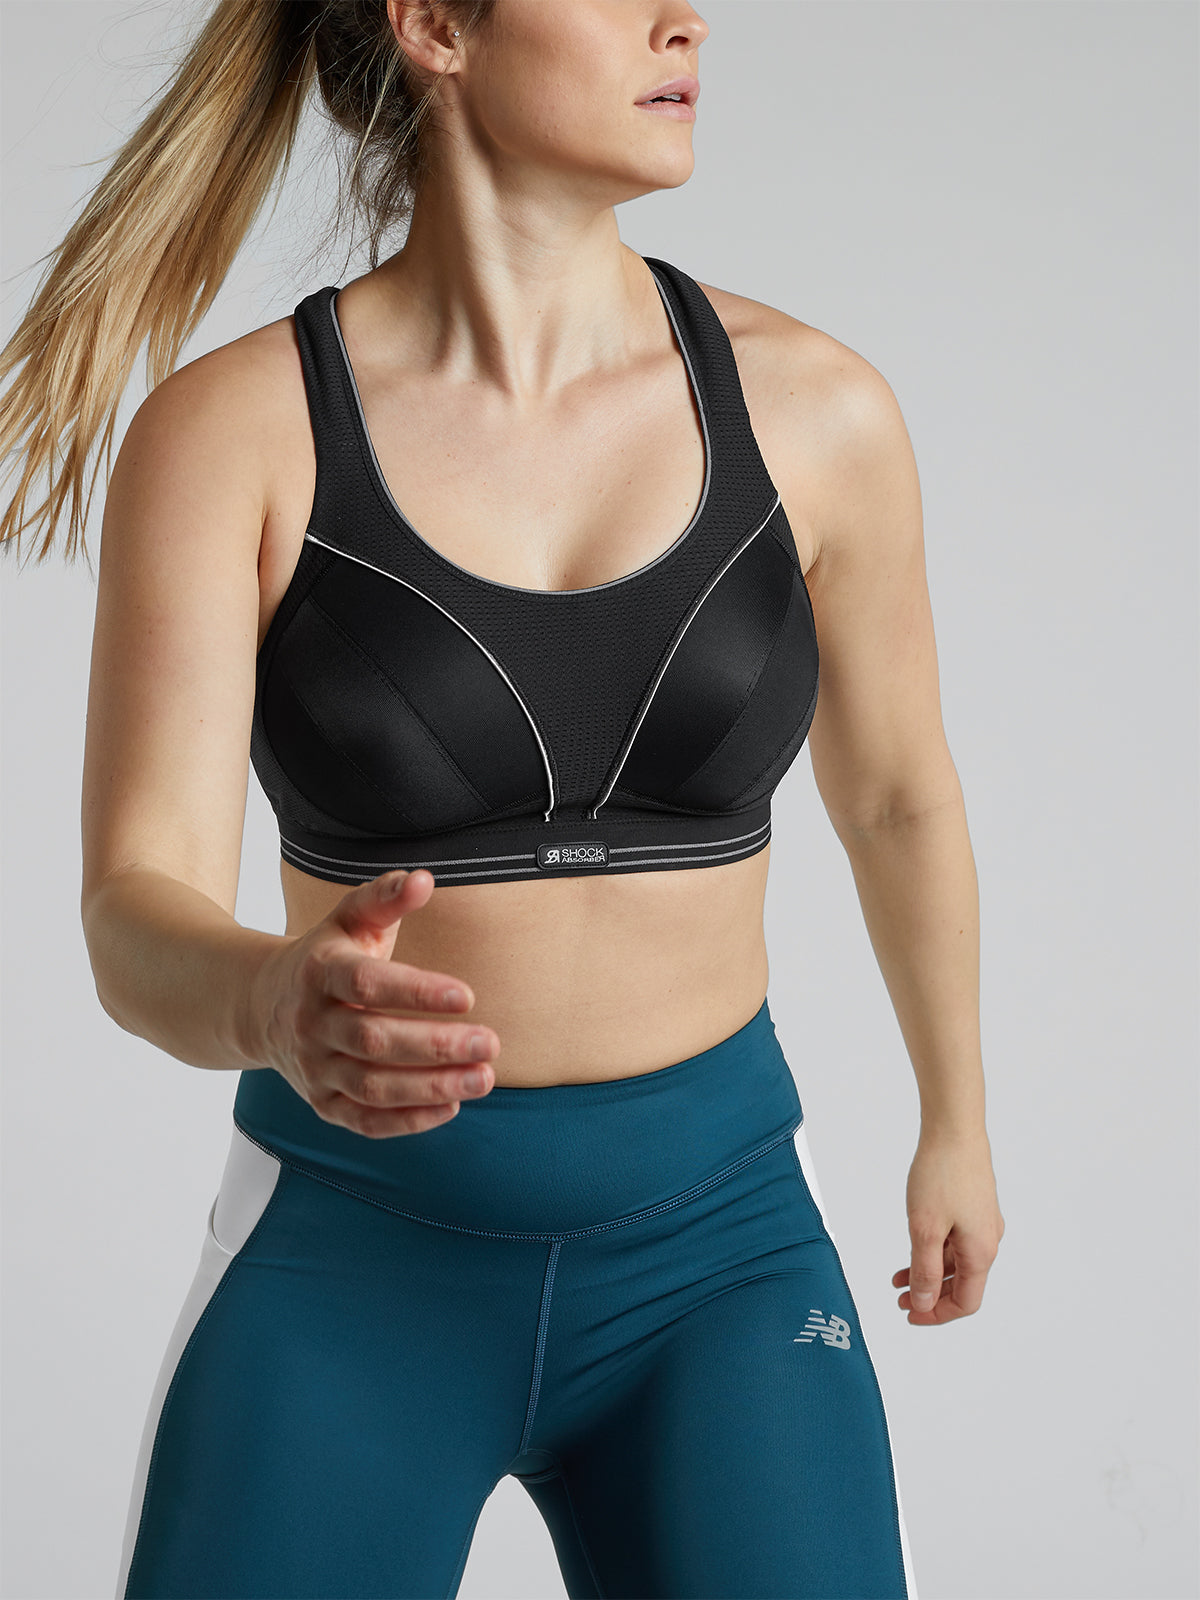 How Much Does A Sports Bra Weigh In Ounces? – solowomen